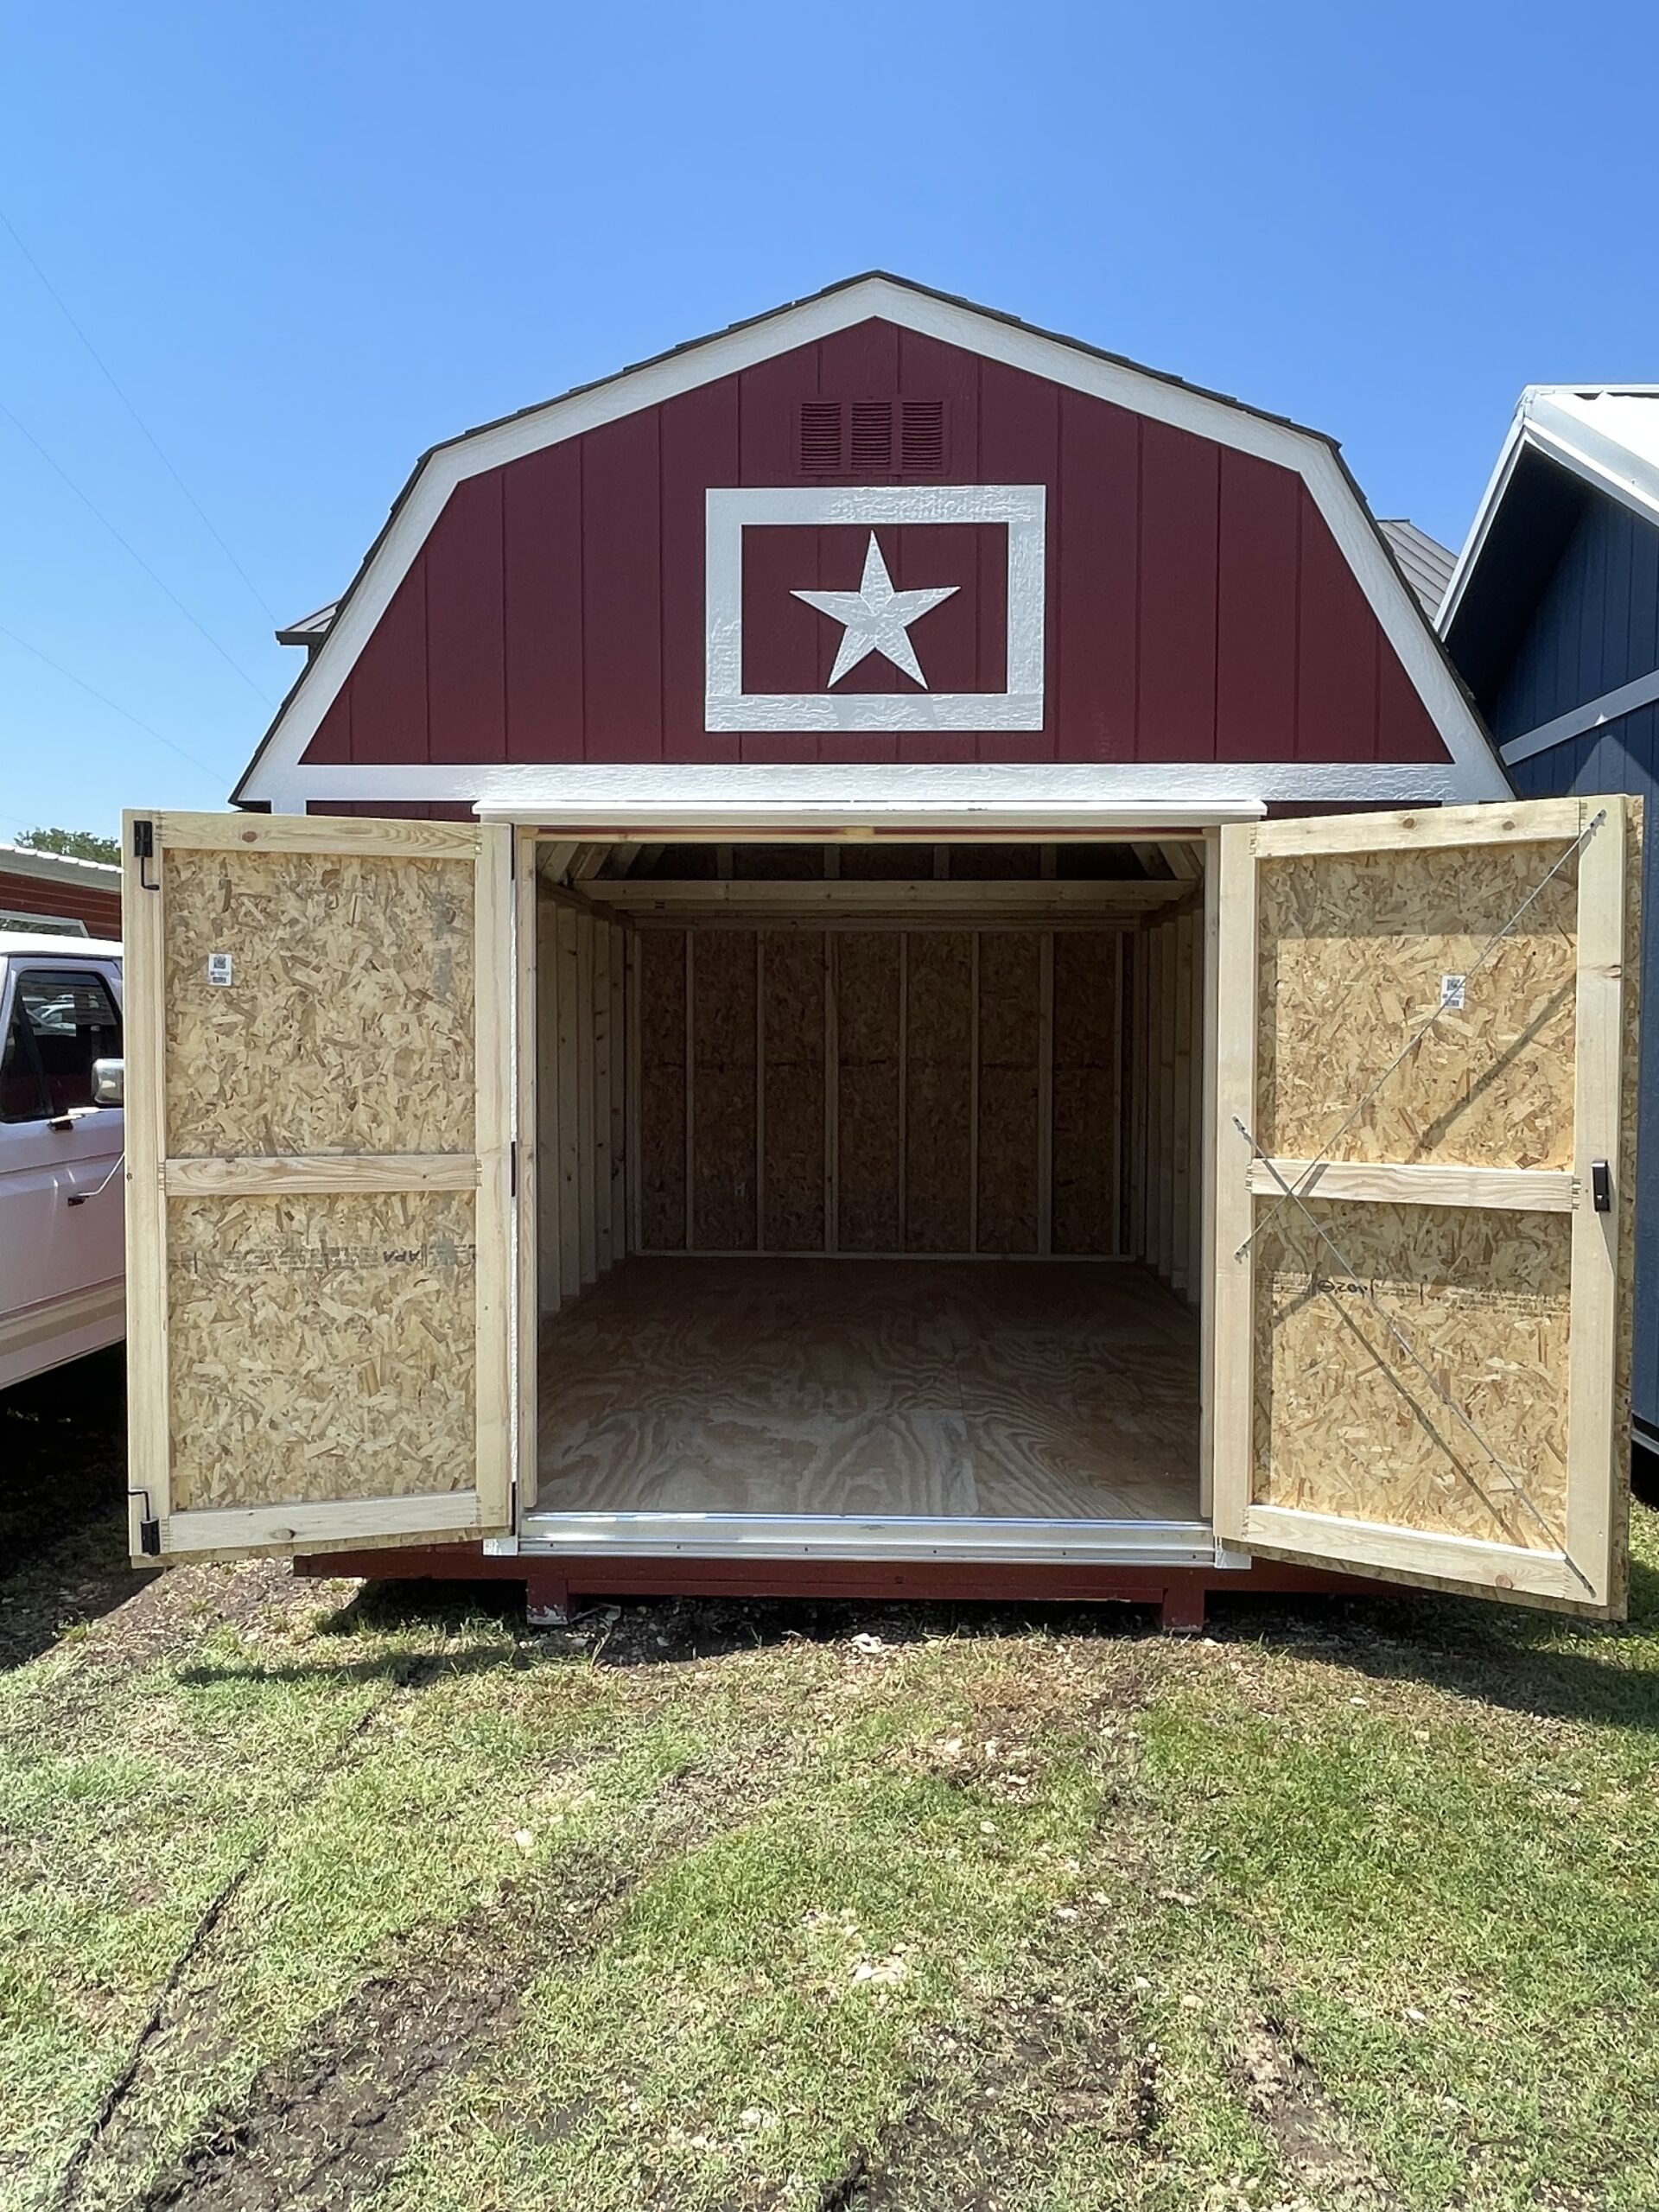 Exterior view of the 10x16 Lofted Barn with the double 6 x 6 shed doors open